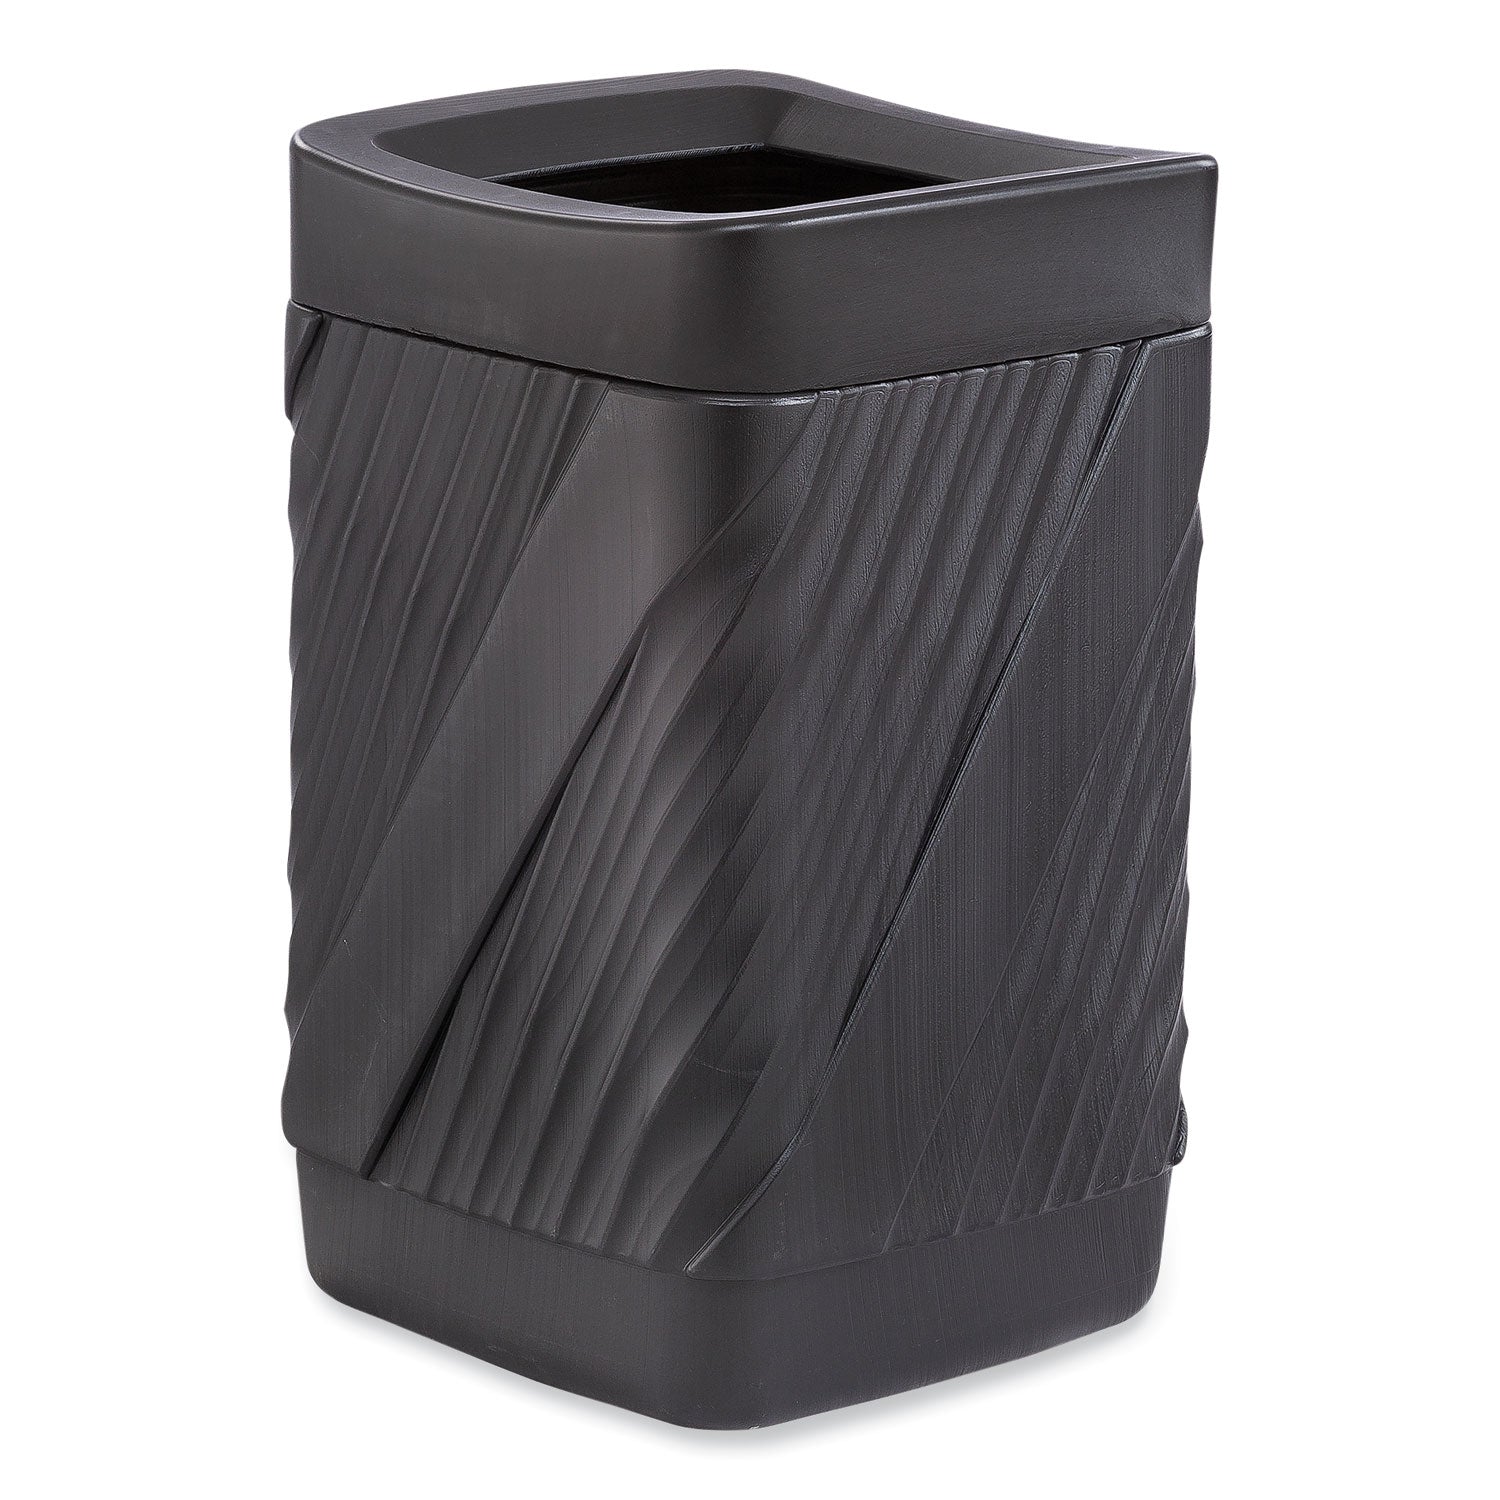 Safco Twist Waste Receptacle - 32 gal Capacity - Removable Lid, Durable, UV Resistant, Fade Resistant - 30" Height x 18.9" Width x 18.9" Depth - High-density Polyethylene (HDPE) - Black - 1 Each - 1